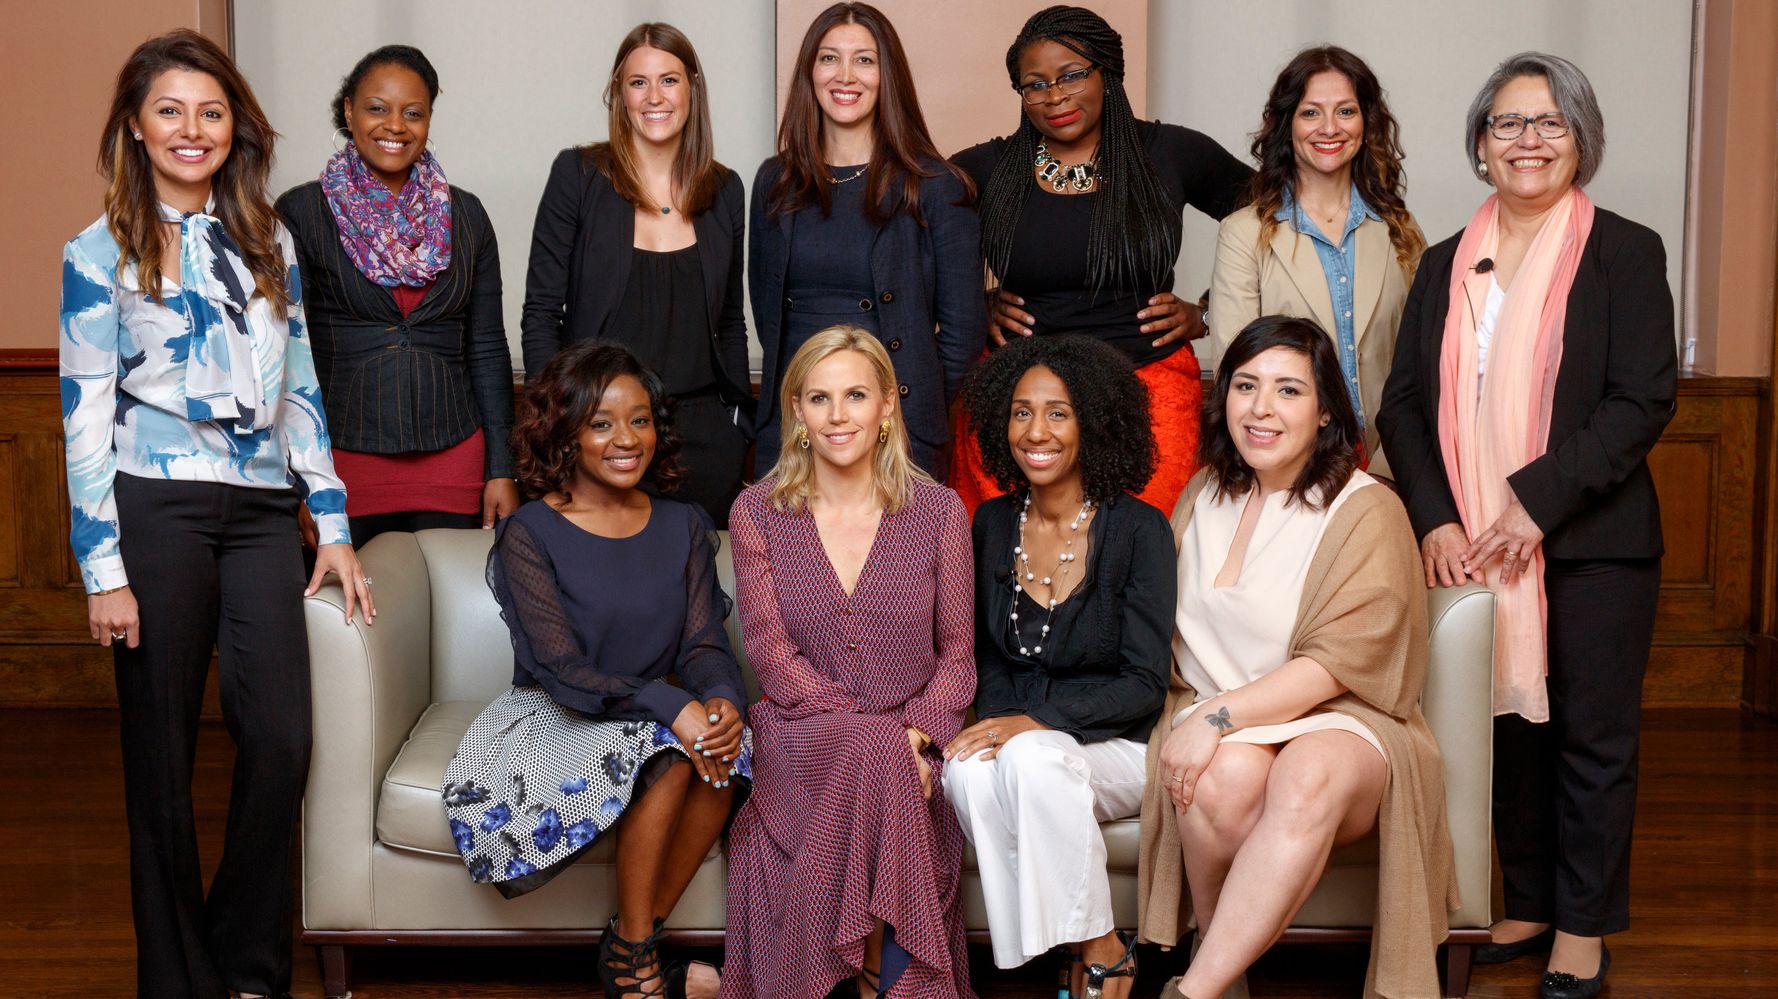 Billion-dollar company founder Tory Burch: Burnout is bad for business